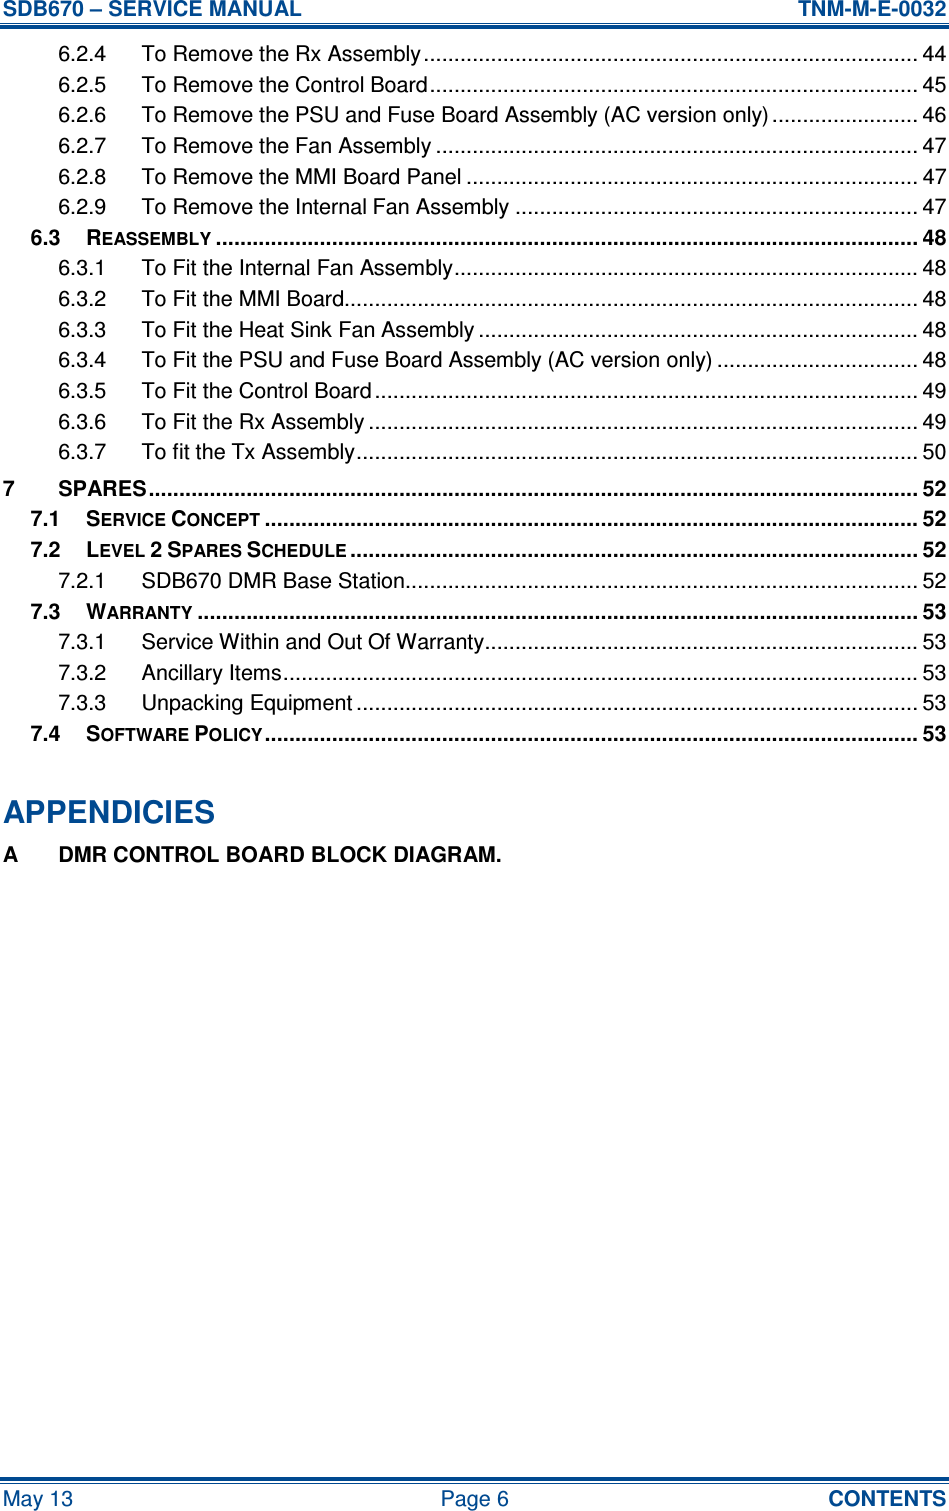 SDB670 – SERVICE MANUAL  TNM-M-E-0032 May 13  Page 6  CONTENTS 6.2.4 To Remove the Rx Assembly................................................................................. 44 6.2.5 To Remove the Control Board................................................................................ 45 6.2.6 To Remove the PSU and Fuse Board Assembly (AC version only)........................ 46 6.2.7 To Remove the Fan Assembly ............................................................................... 47 6.2.8 To Remove the MMI Board Panel .......................................................................... 47 6.2.9 To Remove the Internal Fan Assembly .................................................................. 47 6.3 REASSEMBLY................................................................................................................... 48 6.3.1 To Fit the Internal Fan Assembly............................................................................ 48 6.3.2 To Fit the MMI Board.............................................................................................. 48 6.3.3 To Fit the Heat Sink Fan Assembly ........................................................................ 48 6.3.4 To Fit the PSU and Fuse Board Assembly (AC version only) ................................. 48 6.3.5 To Fit the Control Board ......................................................................................... 49 6.3.6 To Fit the Rx Assembly .......................................................................................... 49 6.3.7 To fit the Tx Assembly............................................................................................ 50 7 SPARES.............................................................................................................................. 52 7.1 SERVICE CONCEPT........................................................................................................... 52 7.2 LEVEL 2 SPARES SCHEDULE............................................................................................. 52 7.2.1 SDB670 DMR Base Station.................................................................................... 52 7.3 WARRANTY...................................................................................................................... 53 7.3.1 Service Within and Out Of Warranty....................................................................... 53 7.3.2 Ancillary Items........................................................................................................ 53 7.3.3 Unpacking Equipment ............................................................................................ 53 7.4 SOFTWARE POLICY........................................................................................................... 53  APPENDICIES A  DMR CONTROL BOARD BLOCK DIAGRAM.   